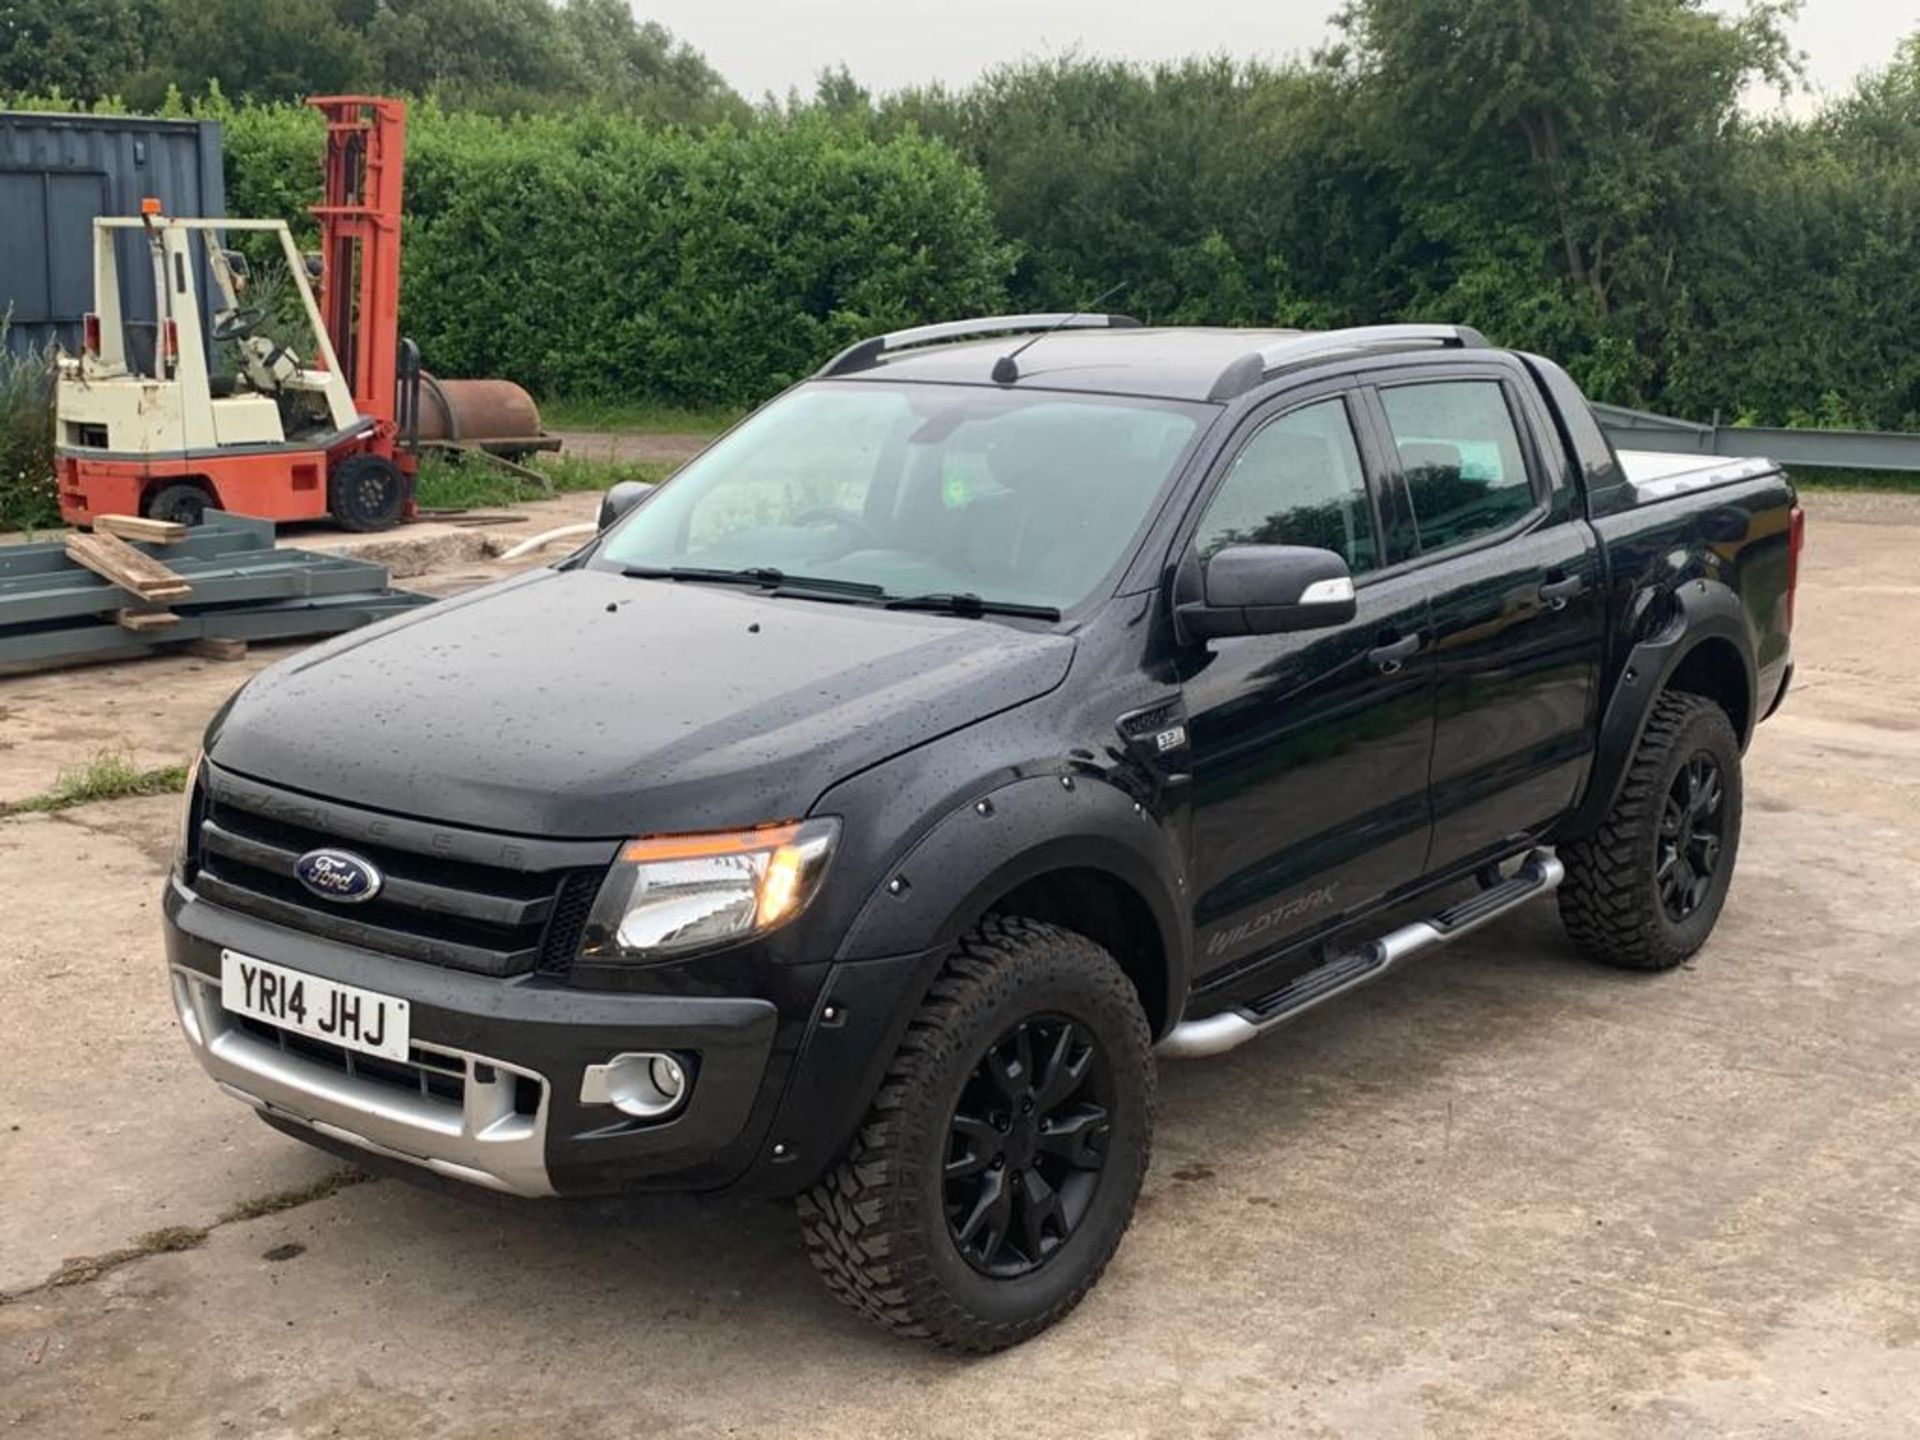 2014/14 REG FORD RANGER WILDTRAK 4X4 D/C TDCI 3.2L AUTOMATIC BLACK PICK-UP, SHOWING 2 FORMER KEEPERS - Image 2 of 9